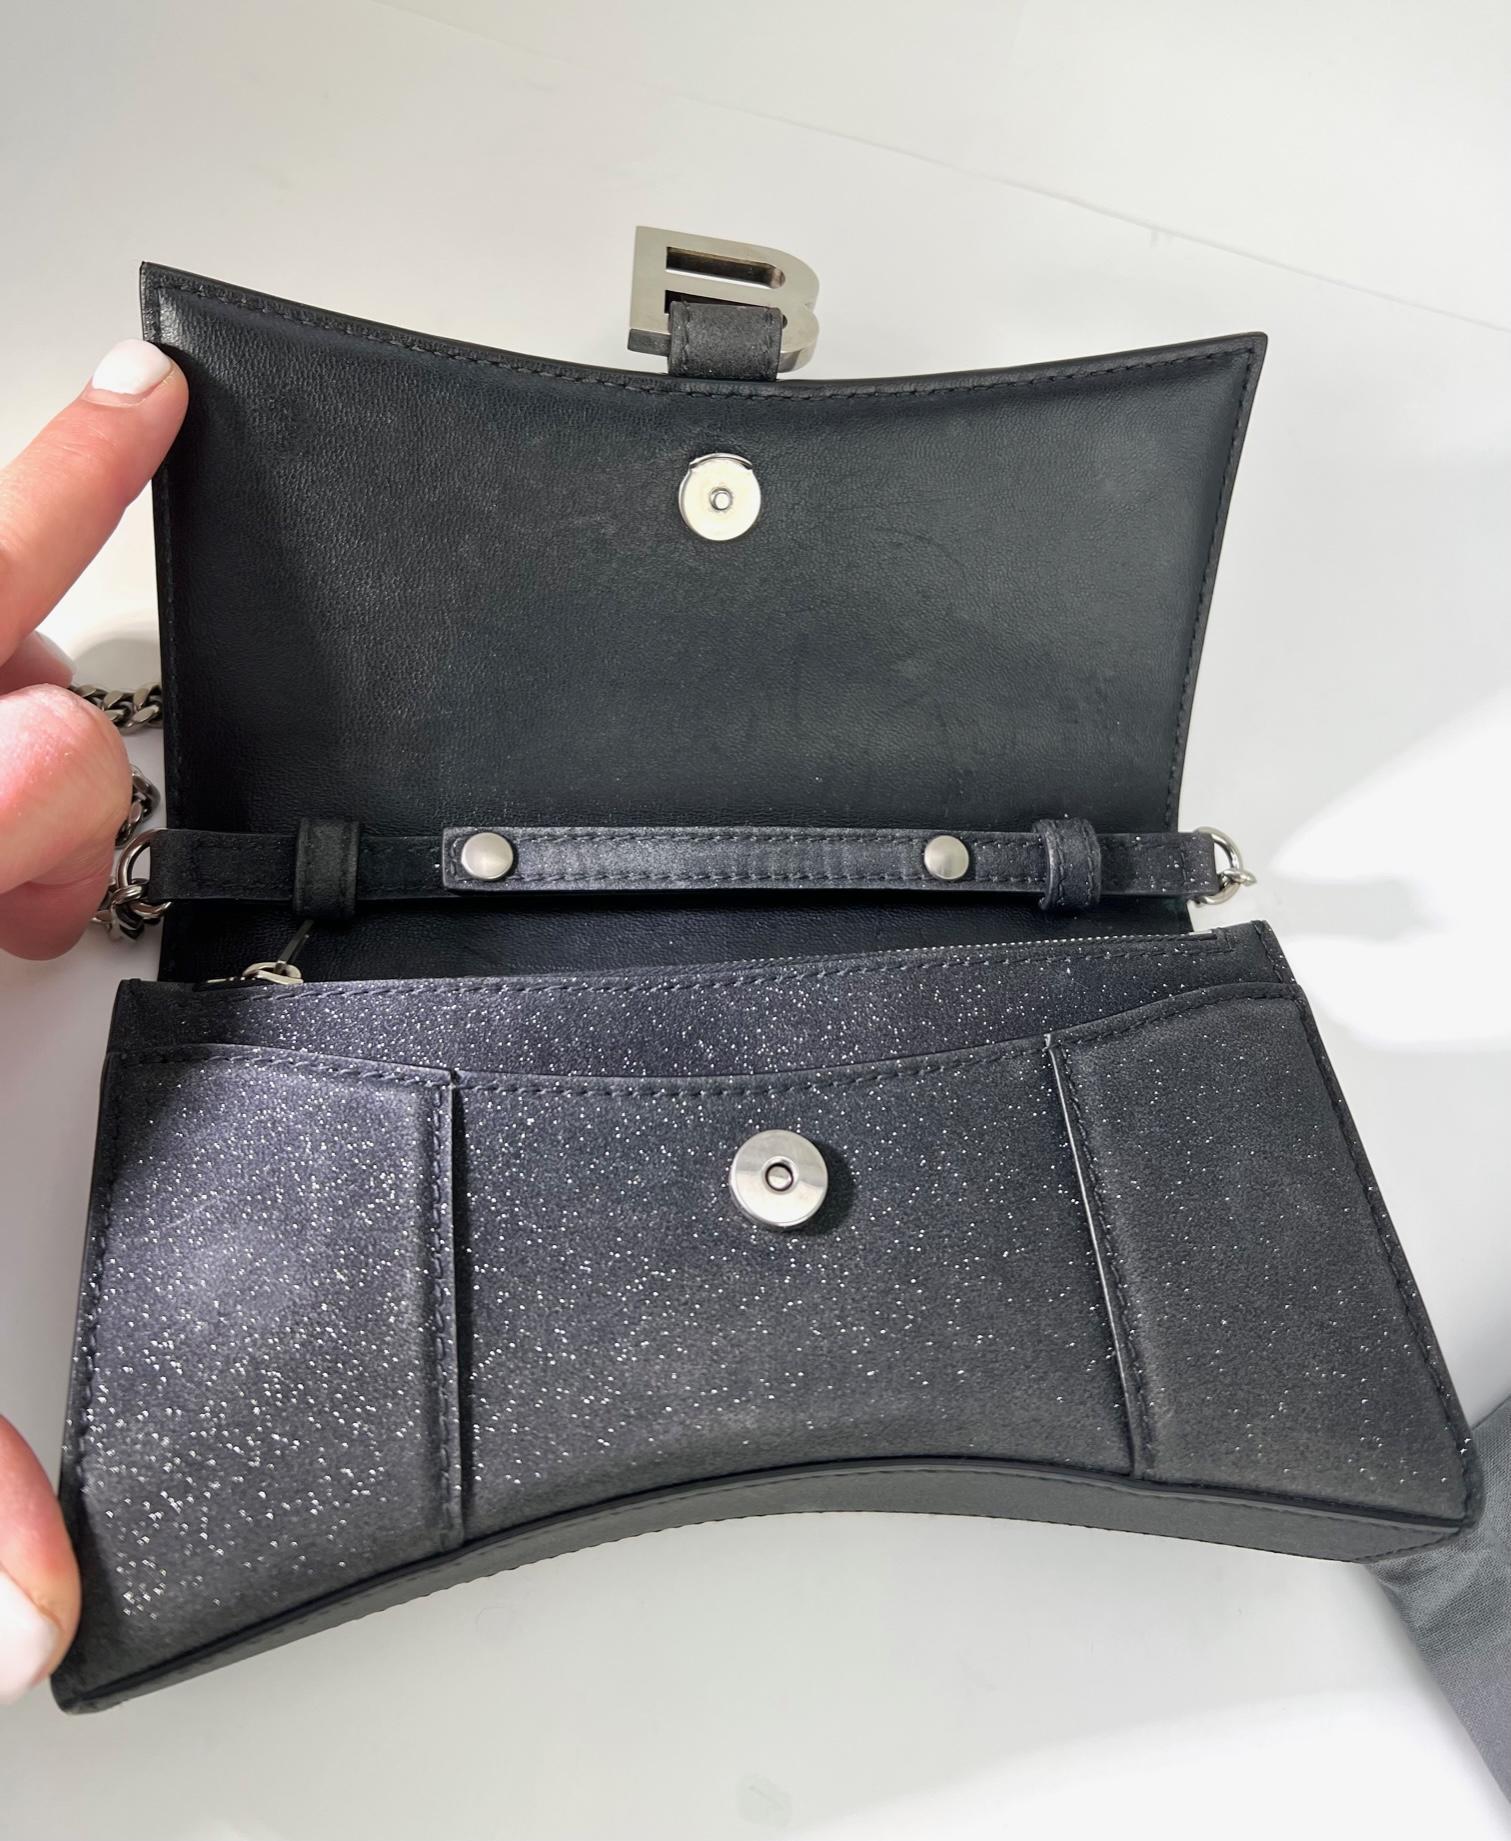 BALENCIAGA Hourglass Wallet On Chain Black Glitter Clutch Shoulder Bag In Excellent Condition For Sale In Freehold, NJ